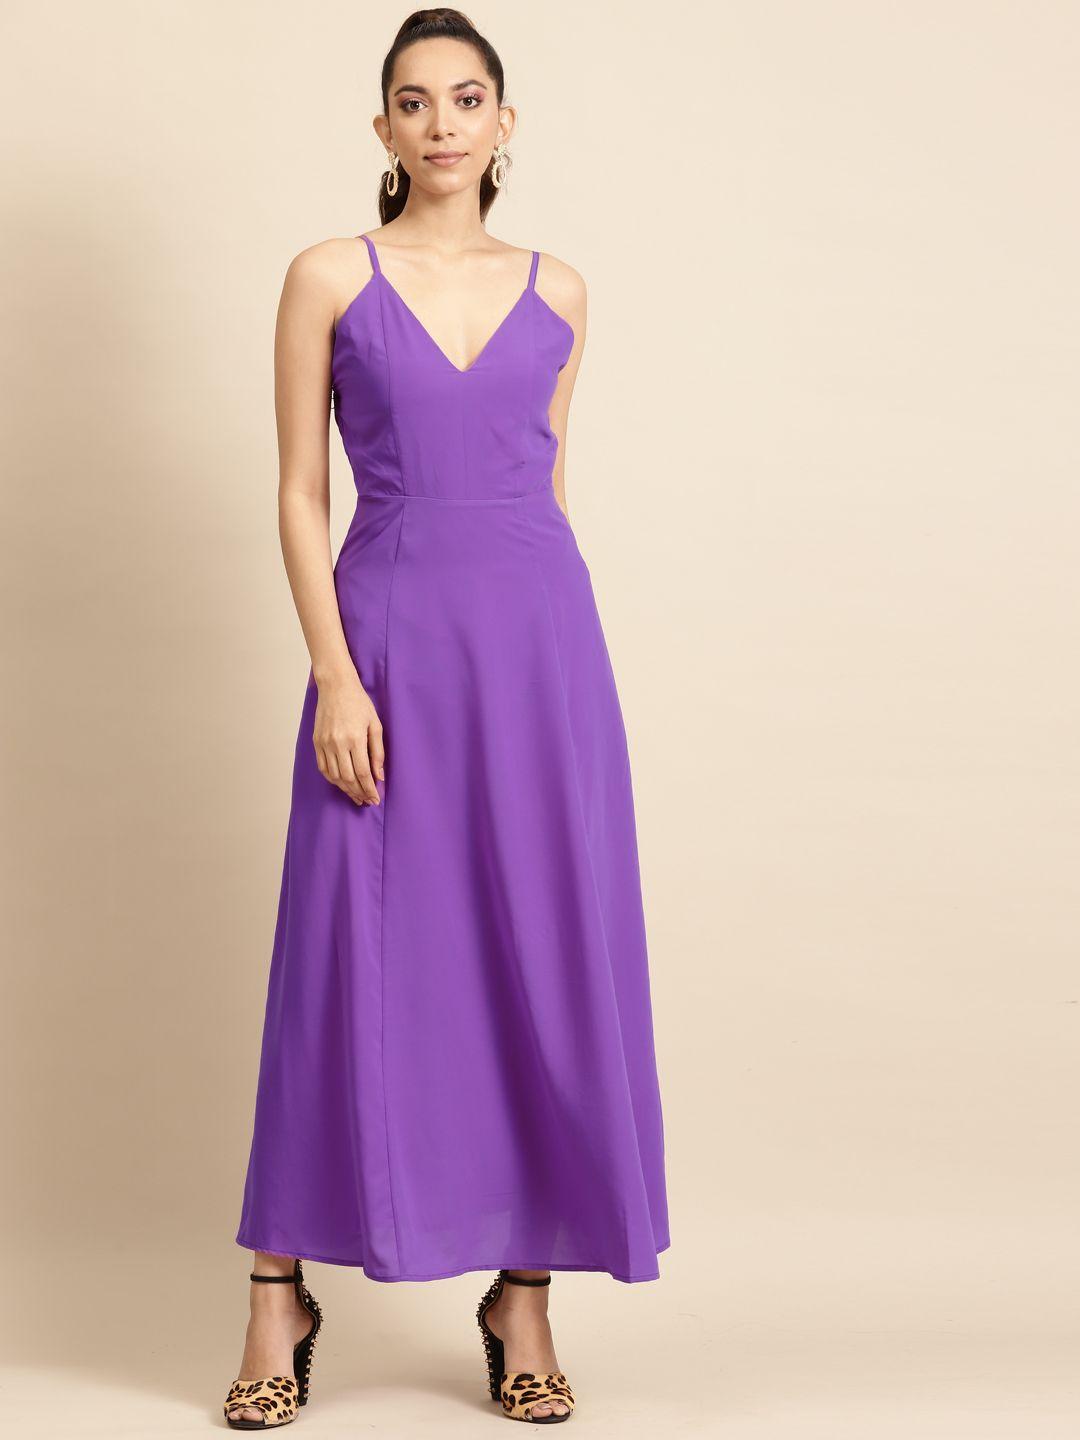 dodo & moa purple solid gown dress with tie-ups at back